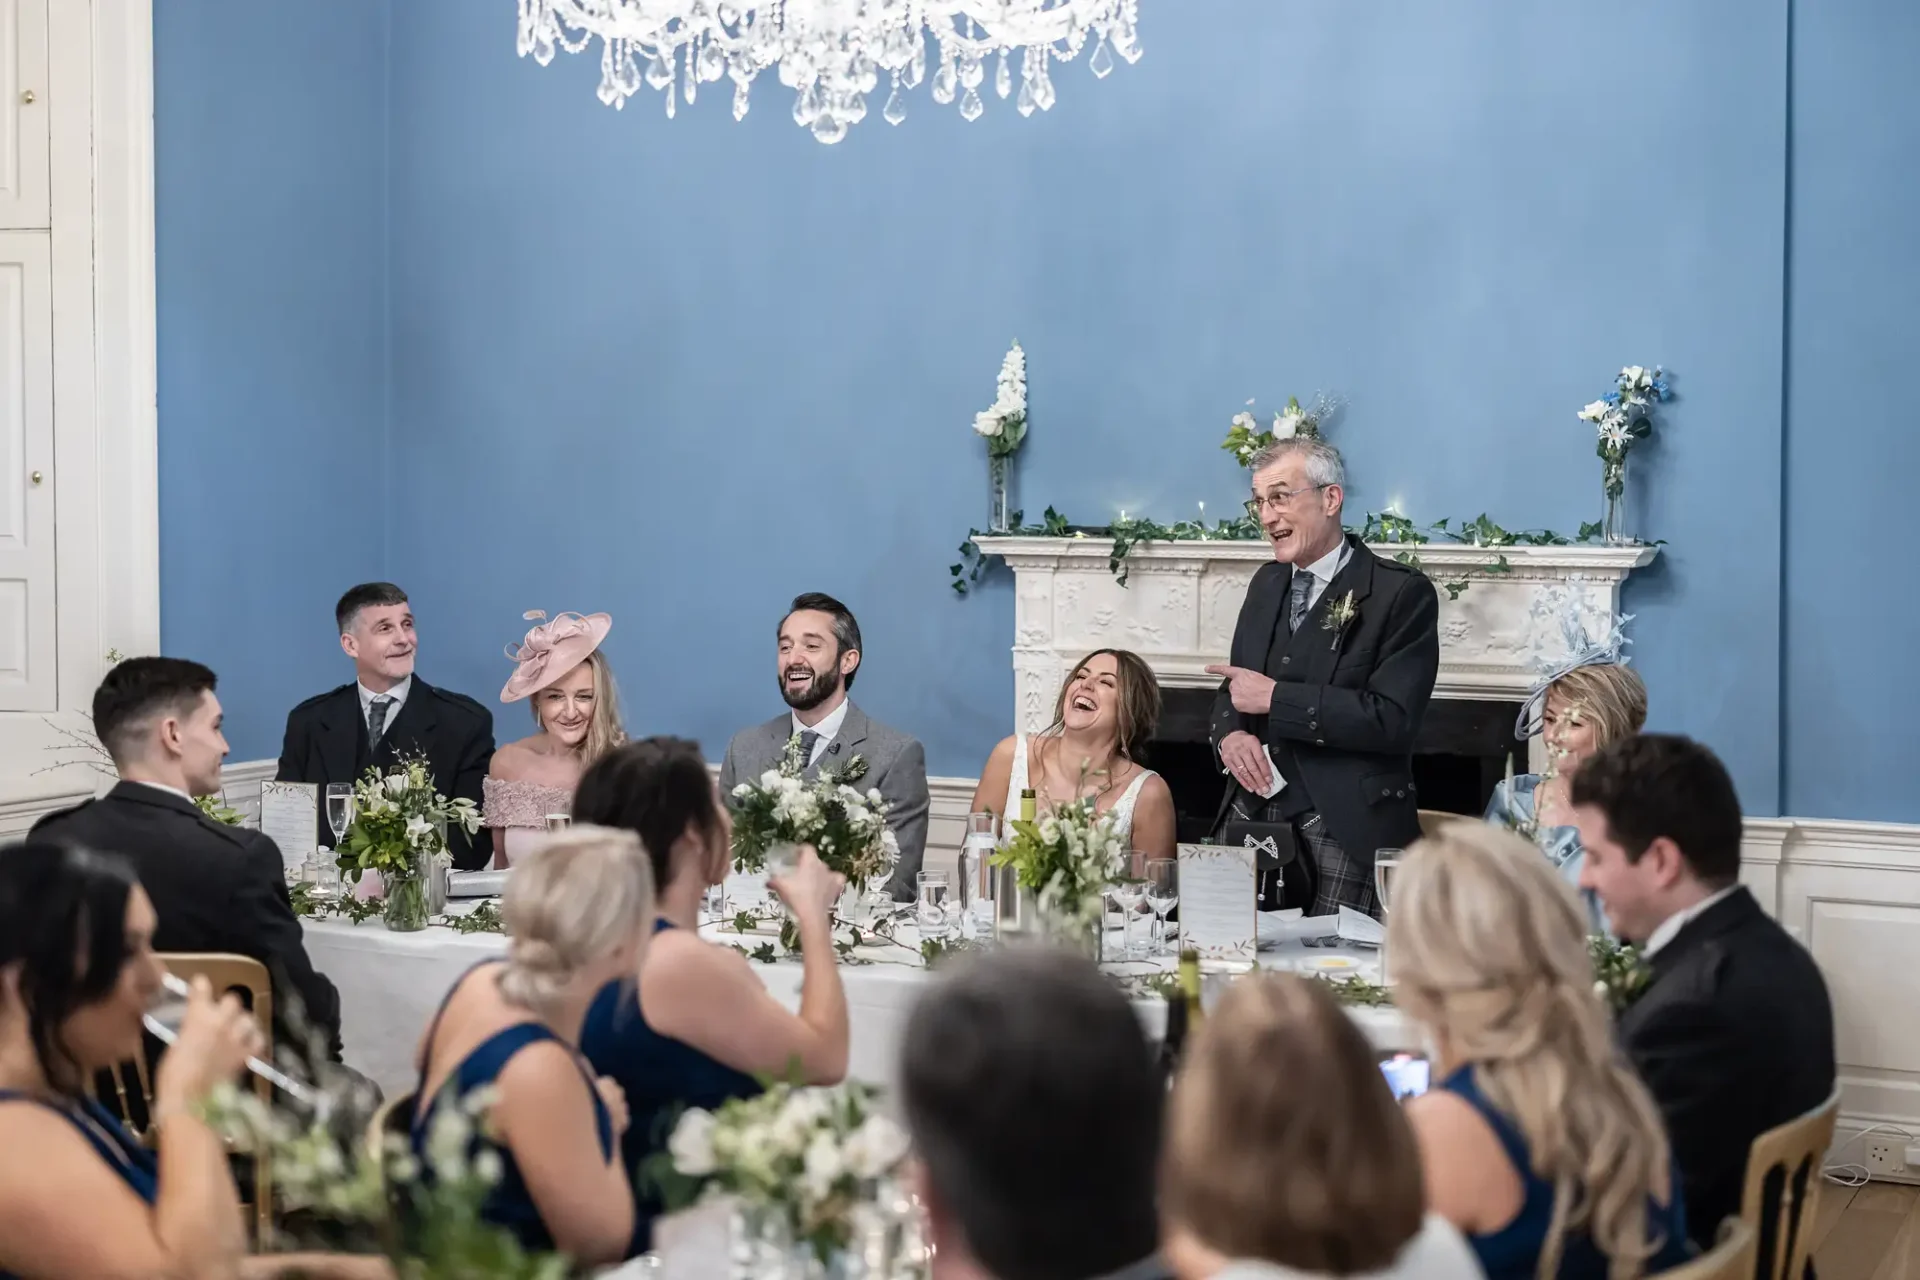 A man gives a speech at a wedding reception in an elegant room with guests seated at decorated tables, laughing and clapping.